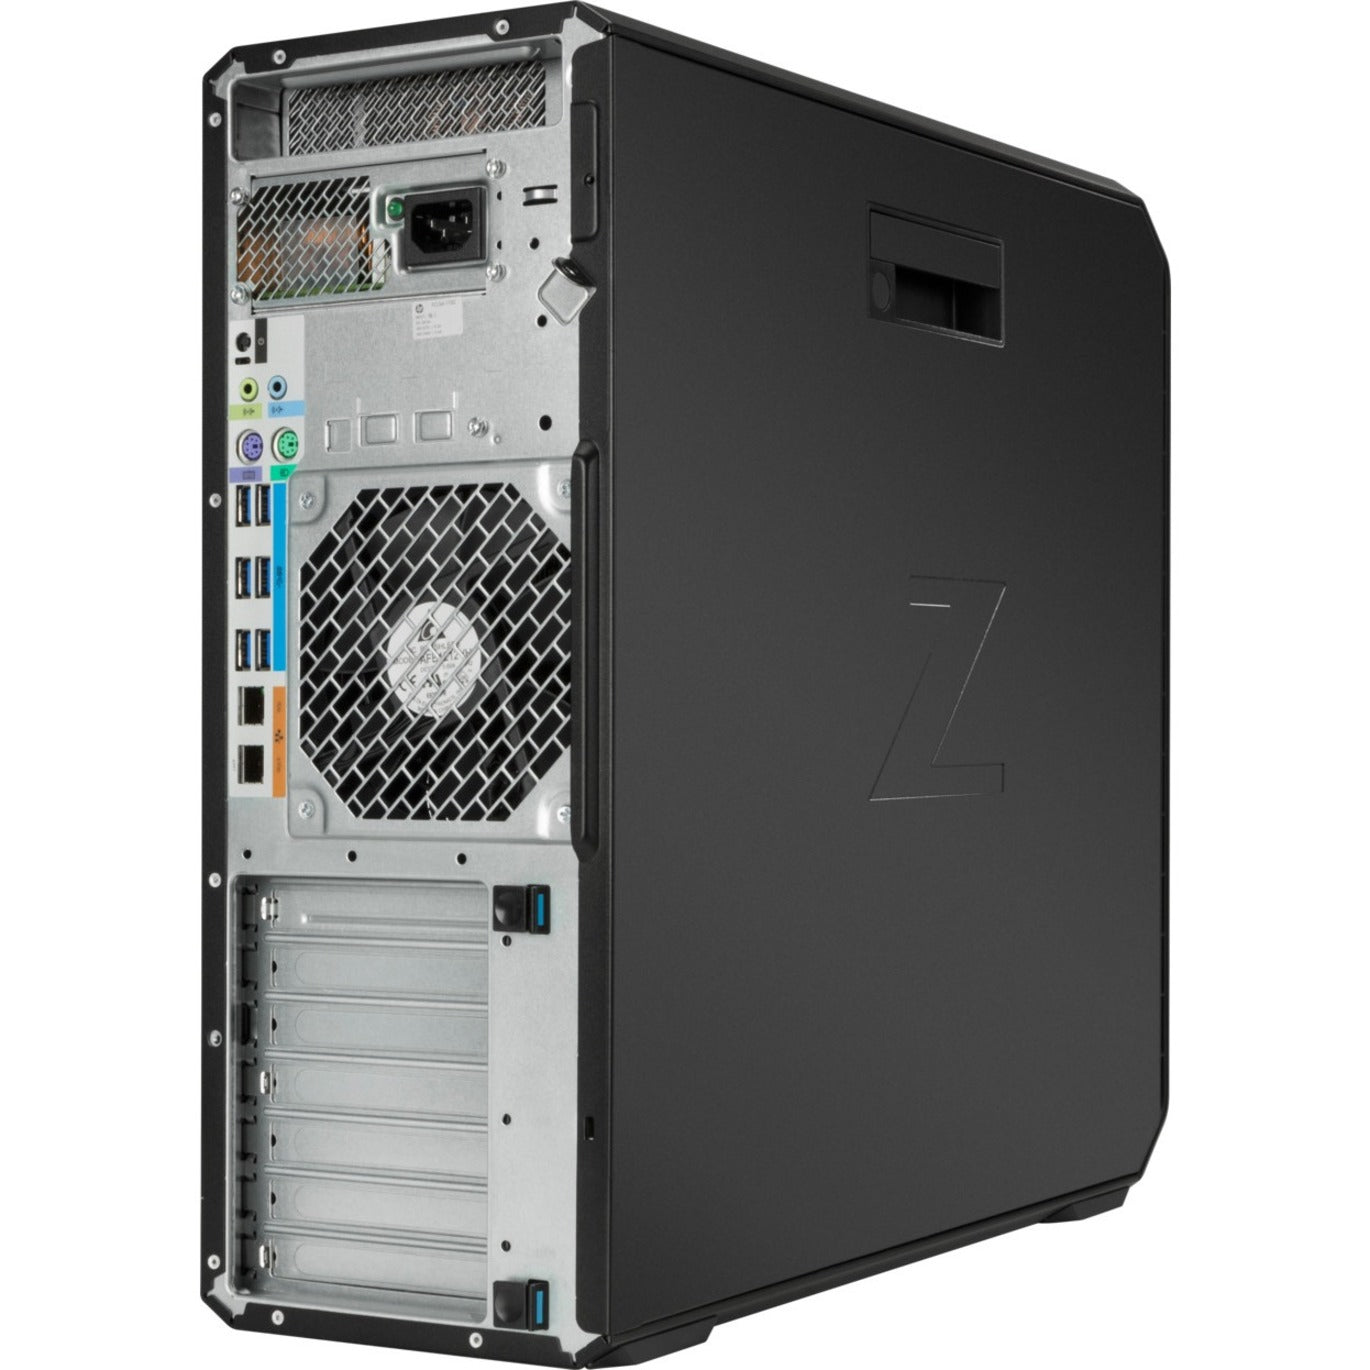 HP Z6 G4 Workstation - Intel Xeon Silver Deca-core 2.40 GHz - 16 GB RAM - 512 GB SSD - Tower [Discontinued]